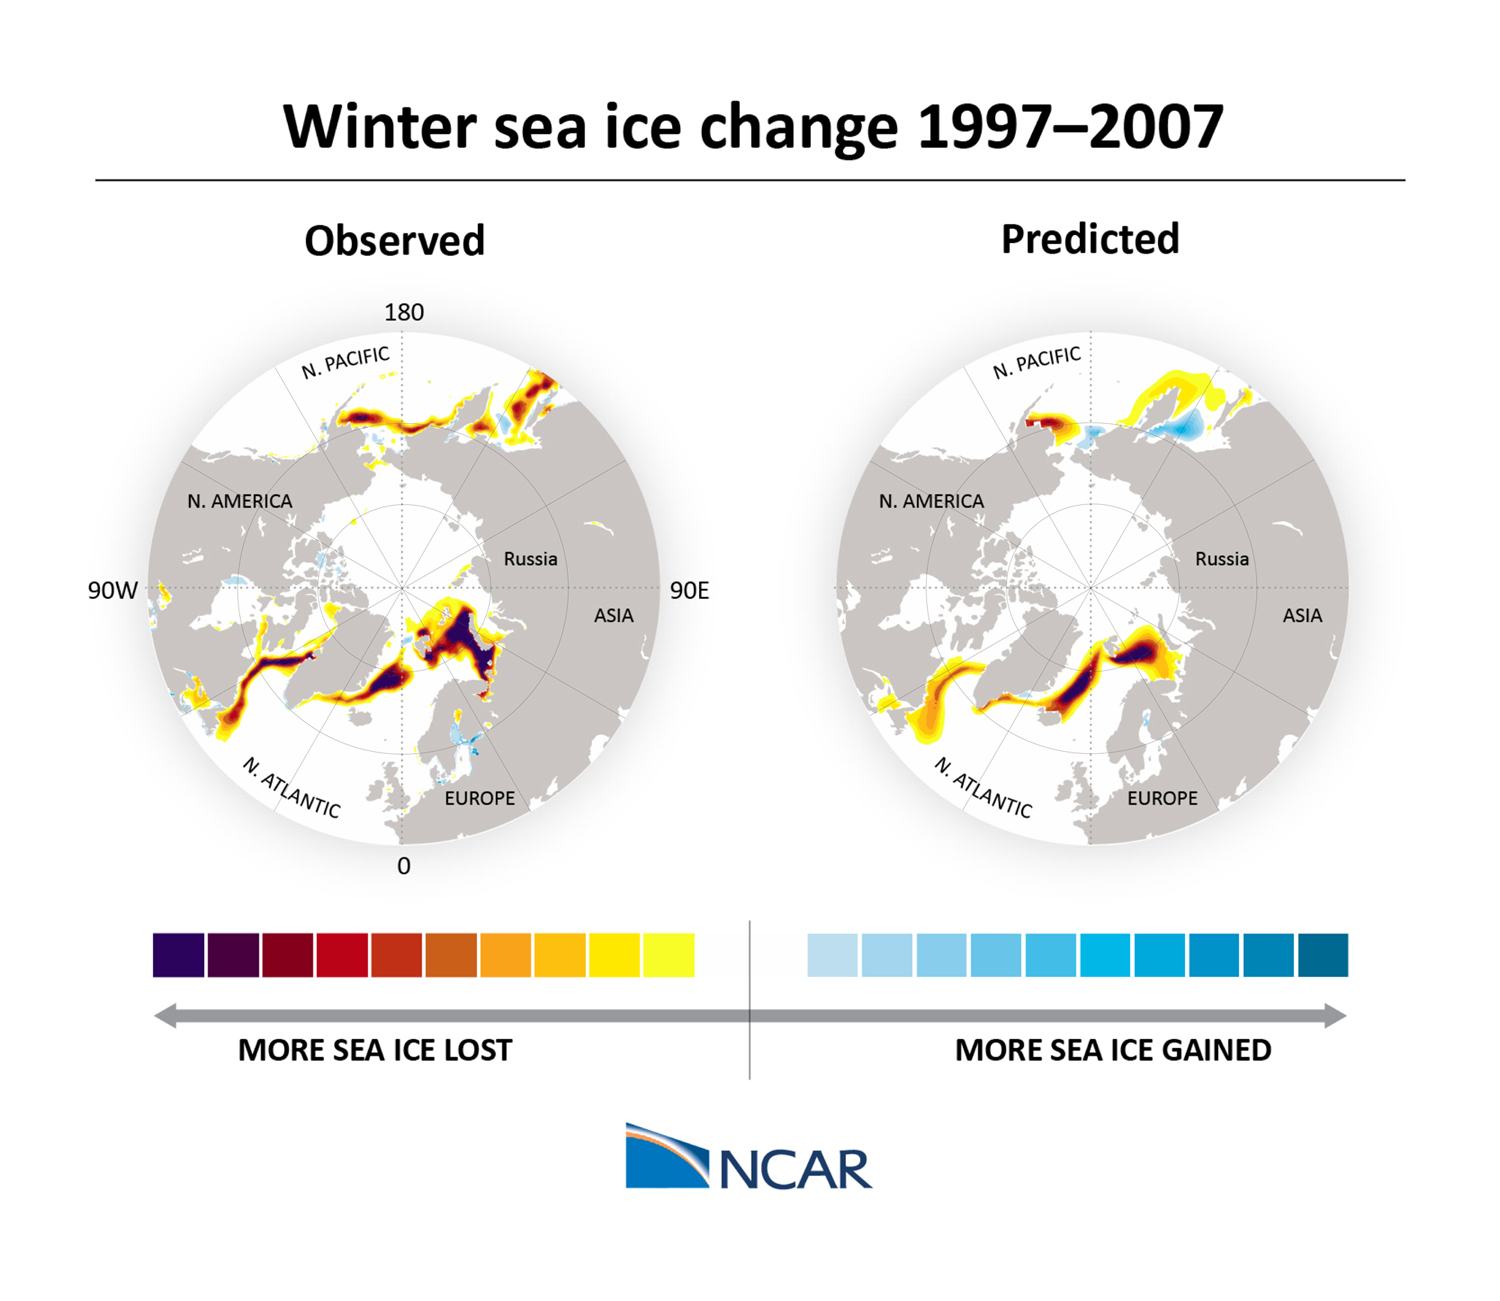 side-by-side maps show observed and predicted winter sea ice loss